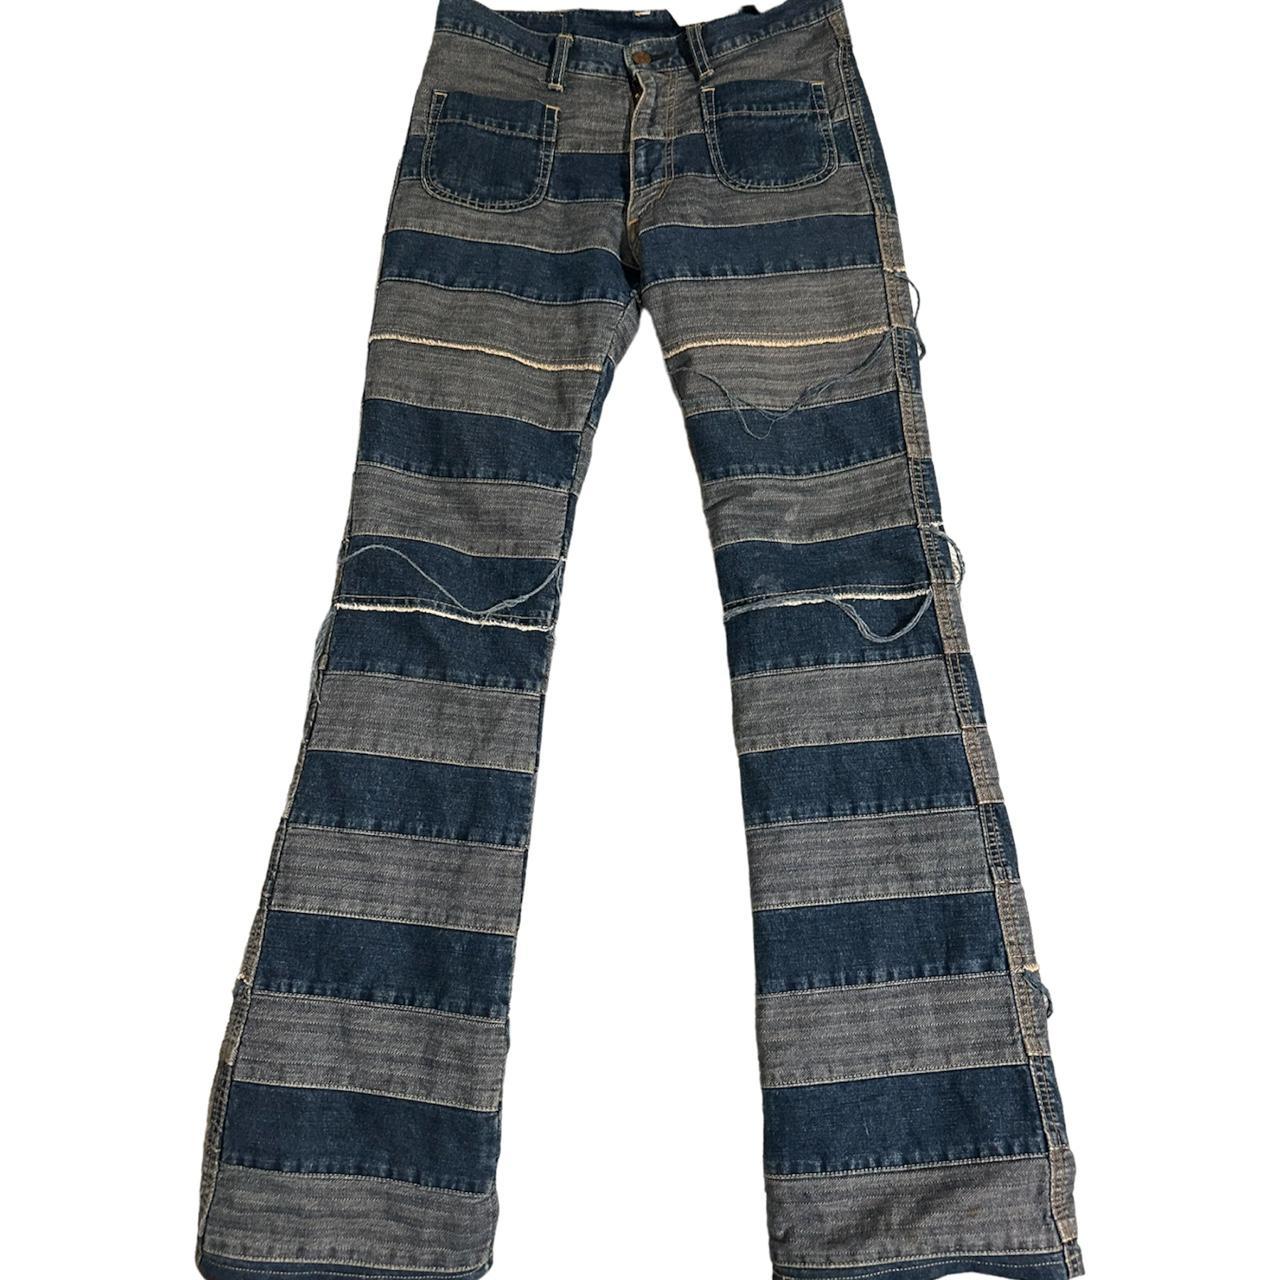 Hysteric Glamour Men's Blue Jeans